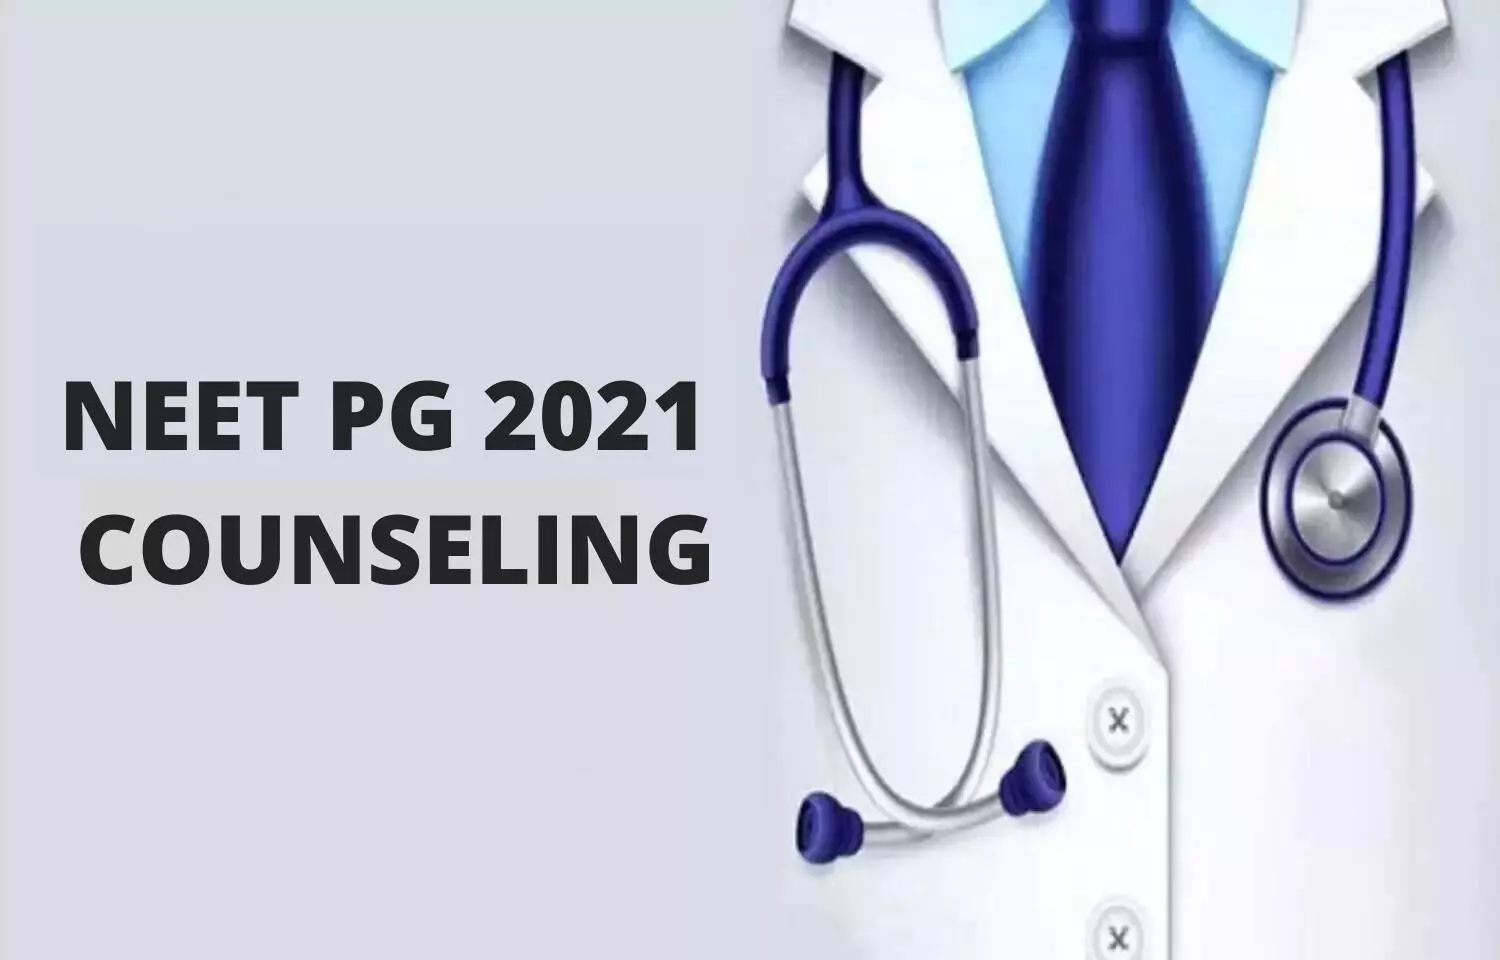 No further rounds of NEET PG 2021 counselling can be conducted: DGHS tells Supreme Court